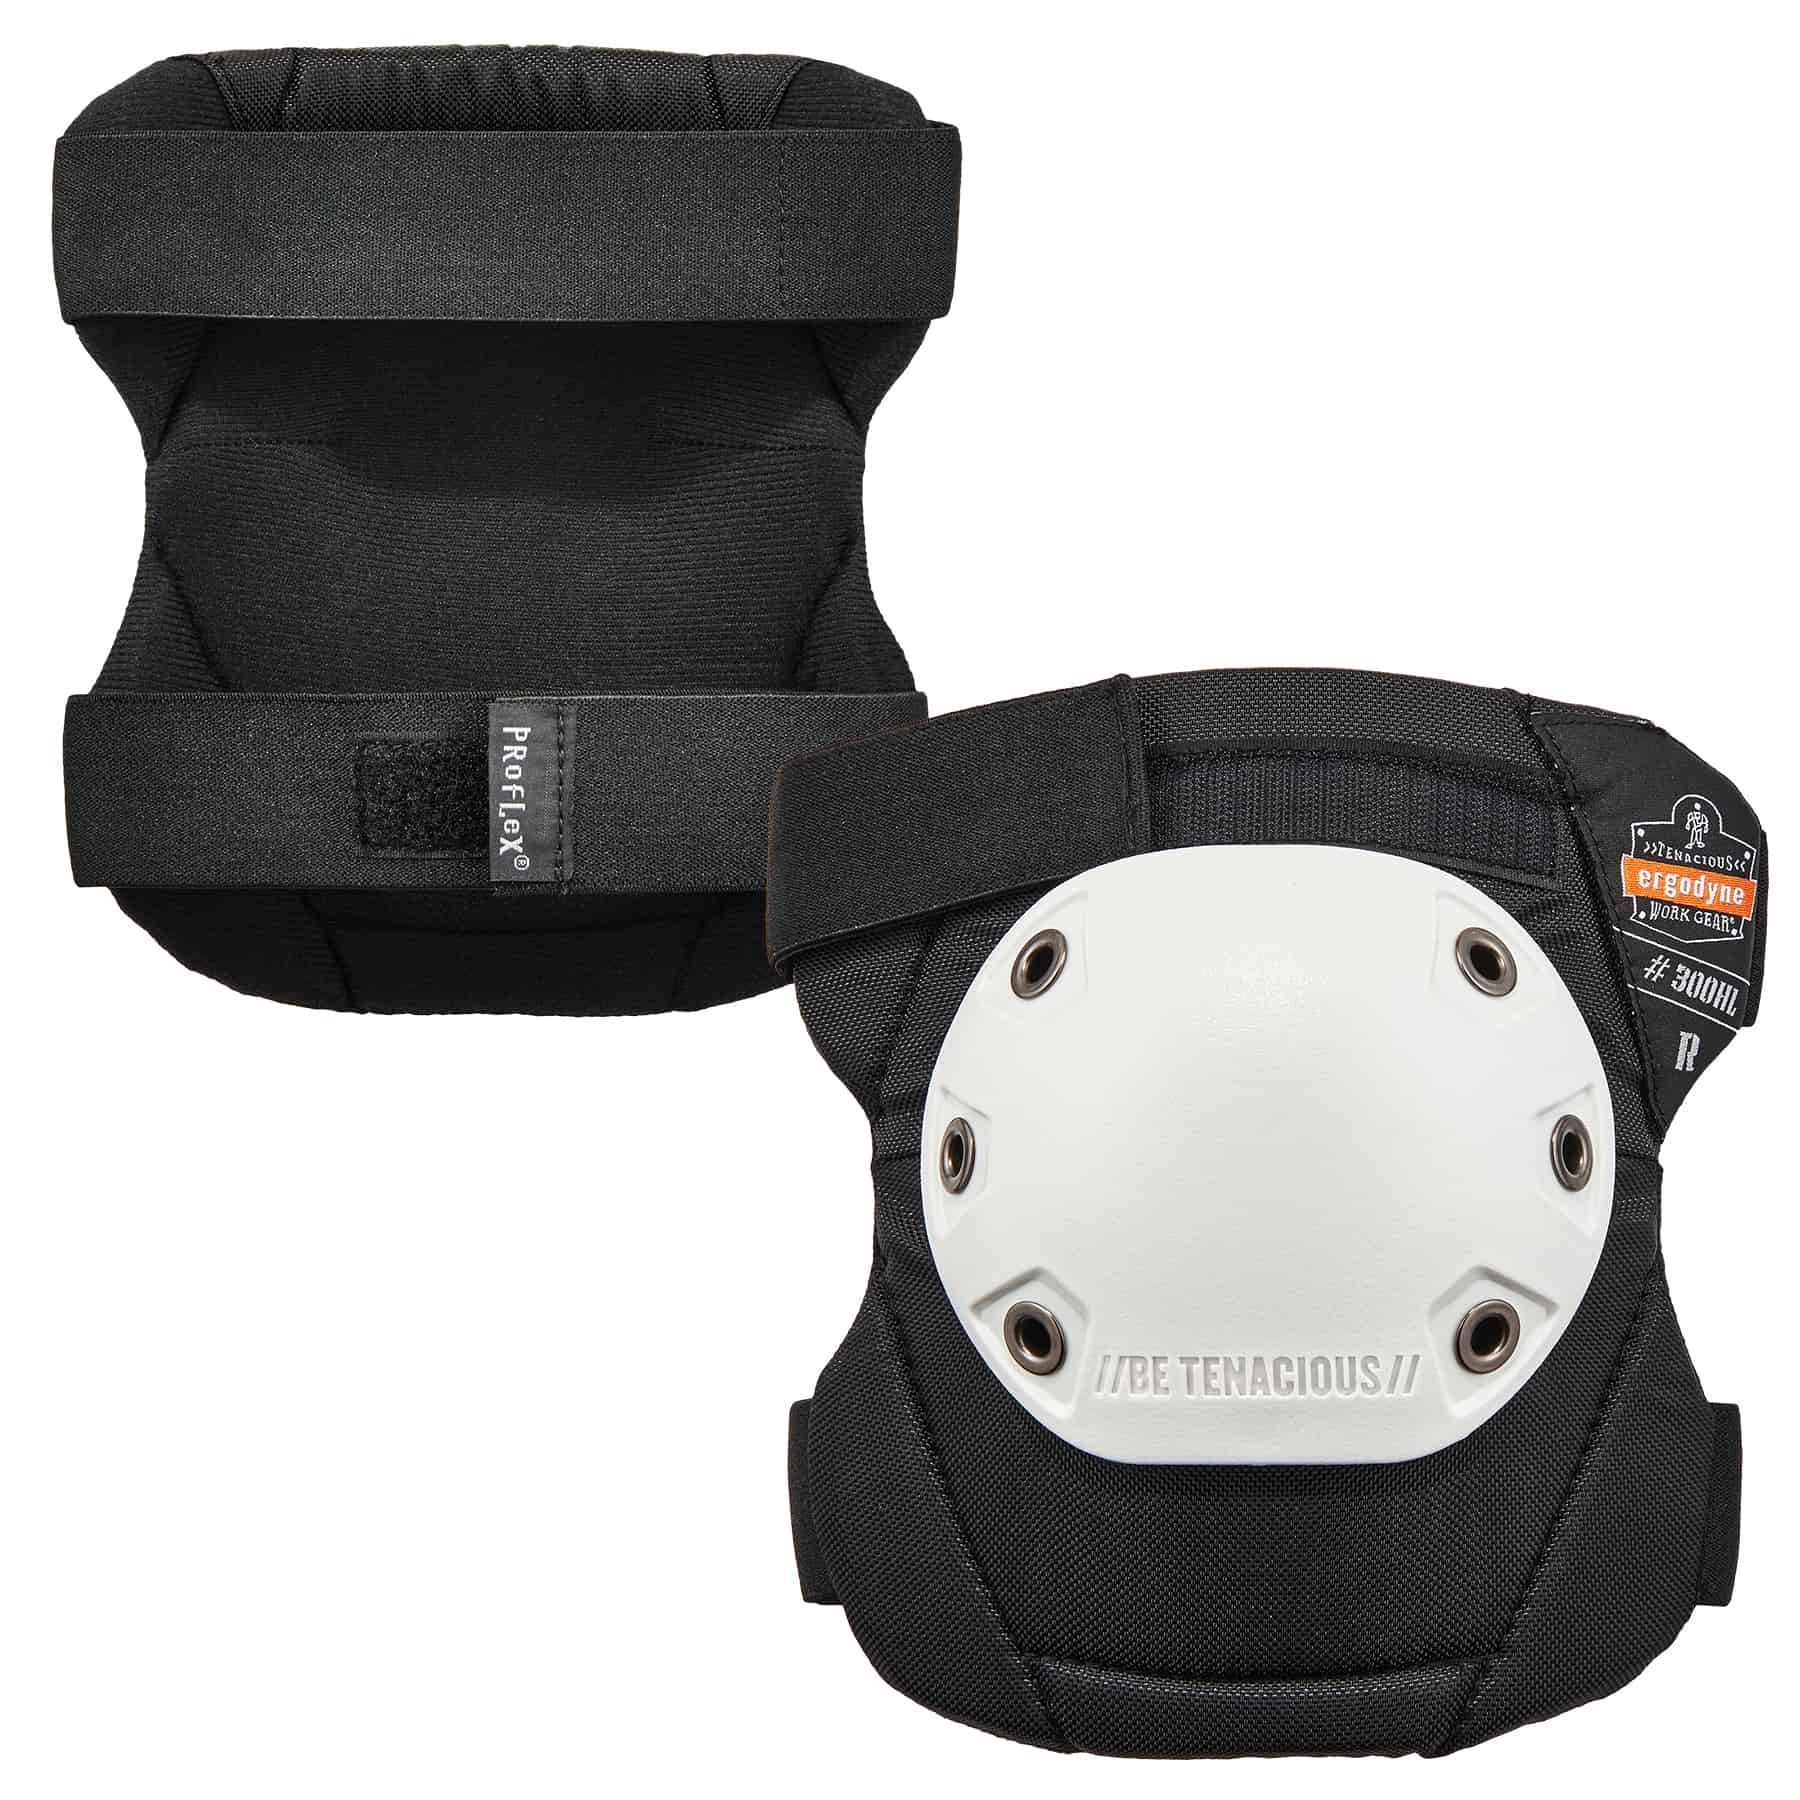 Rounded Cap Knee Pads - Hook and Loop